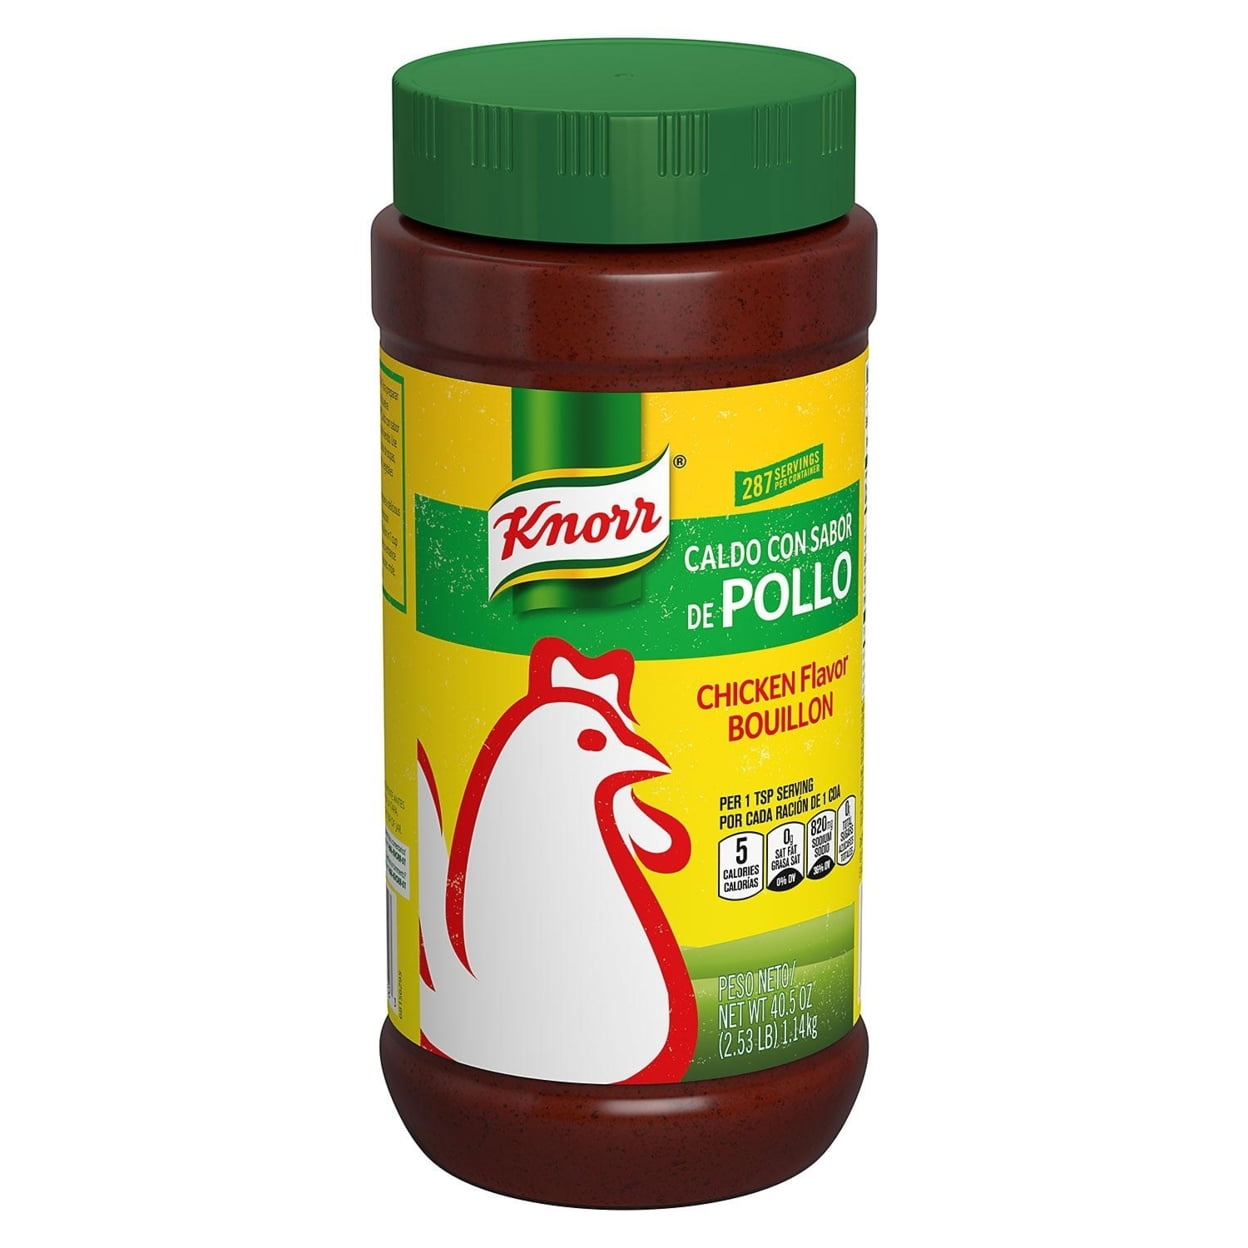 Knorr Granulated Chicken Bouillon (40 Ounce)